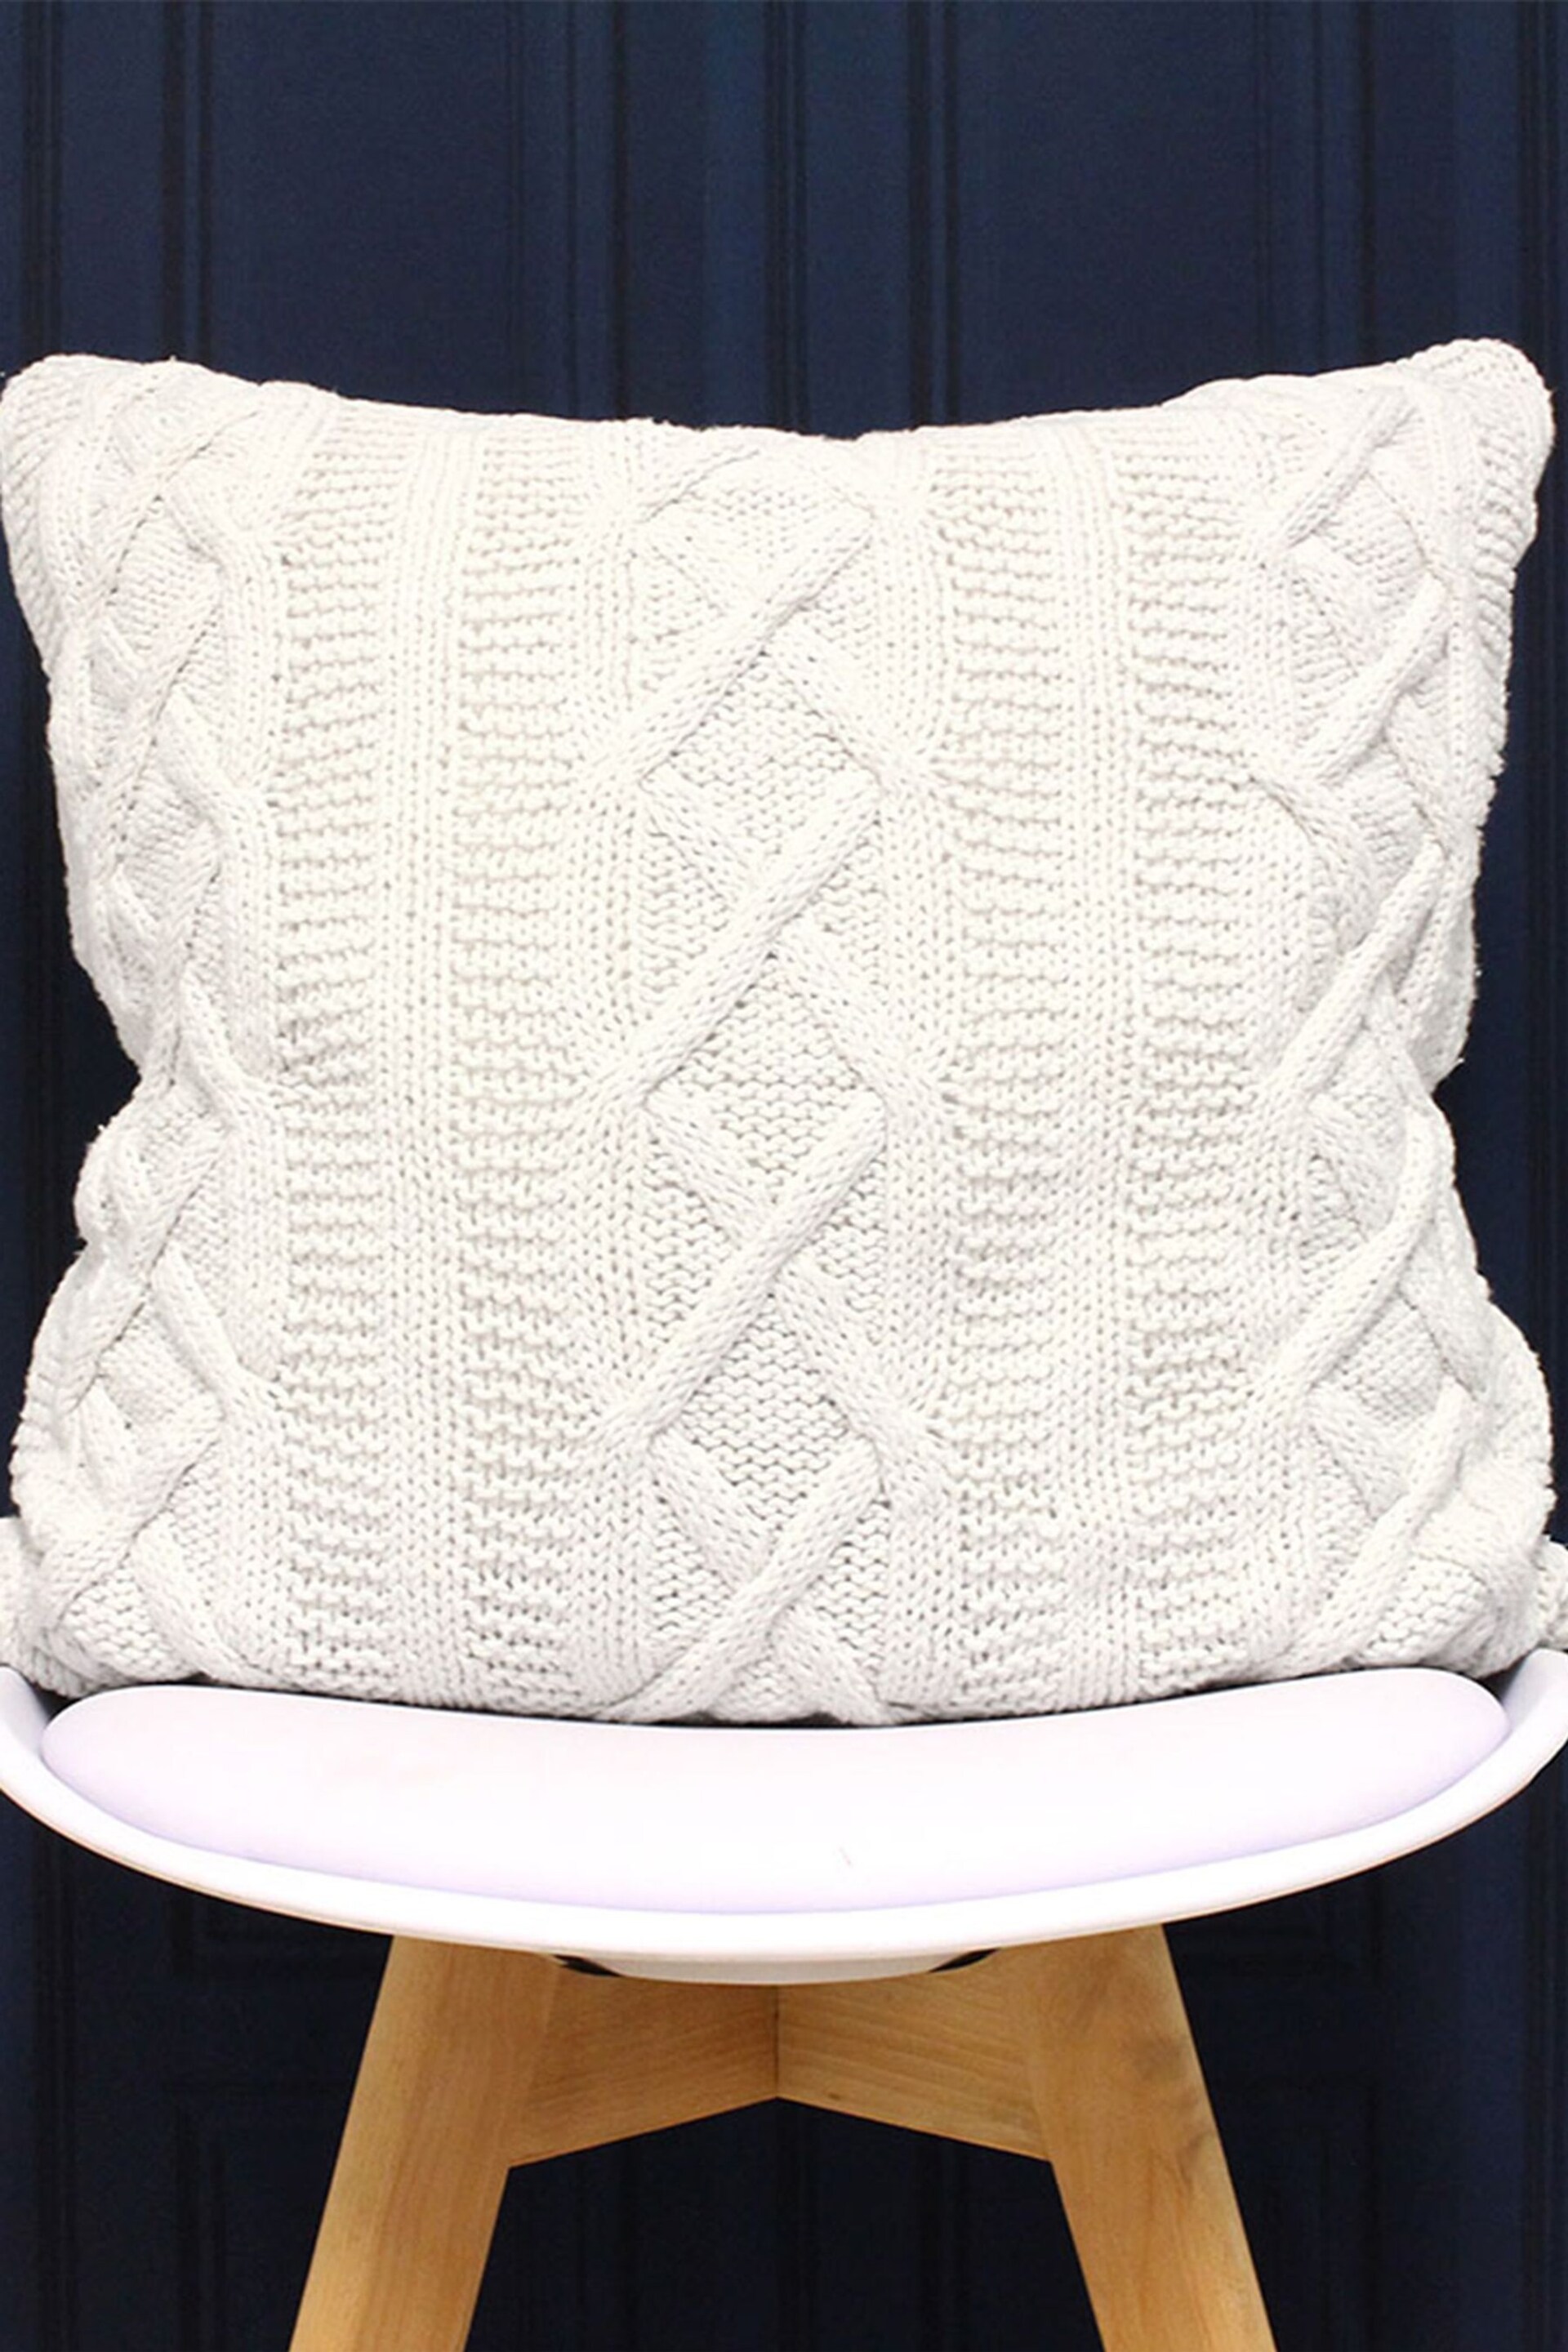 Riva Paoletti Cream Aran Cable Knit Polyester Filled Cushion - Image 1 of 3